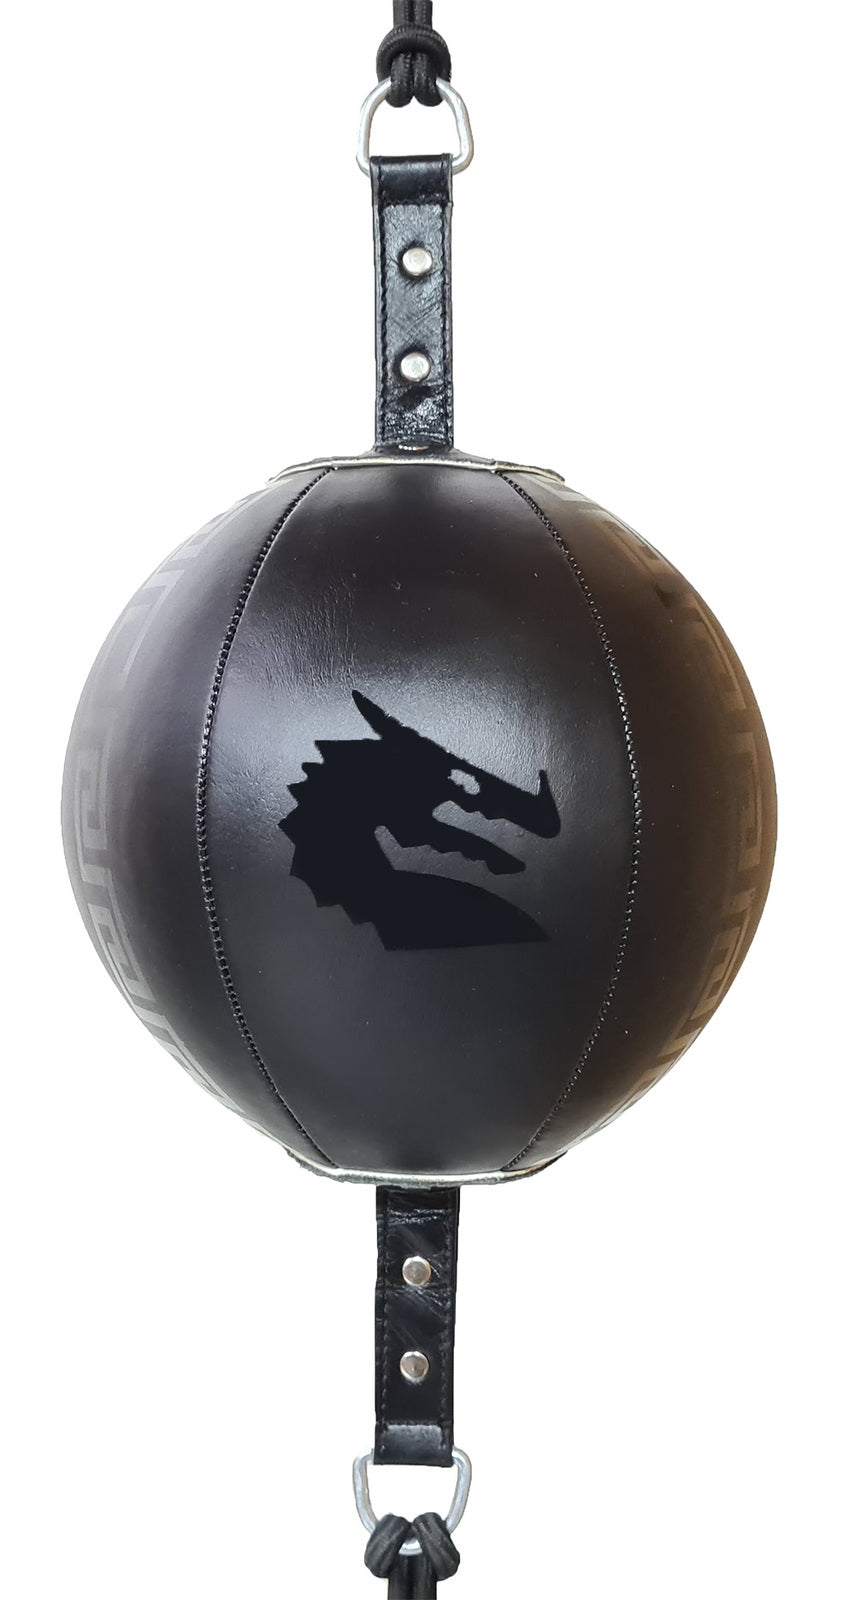 The Fitness Hero B2 Bomber round floor to ceiling boxing ball from Morgan Sports is great in improving any boxers hand-eye coordination, punching speed, striking accuracy, and reaction time. Made from tough Nylon